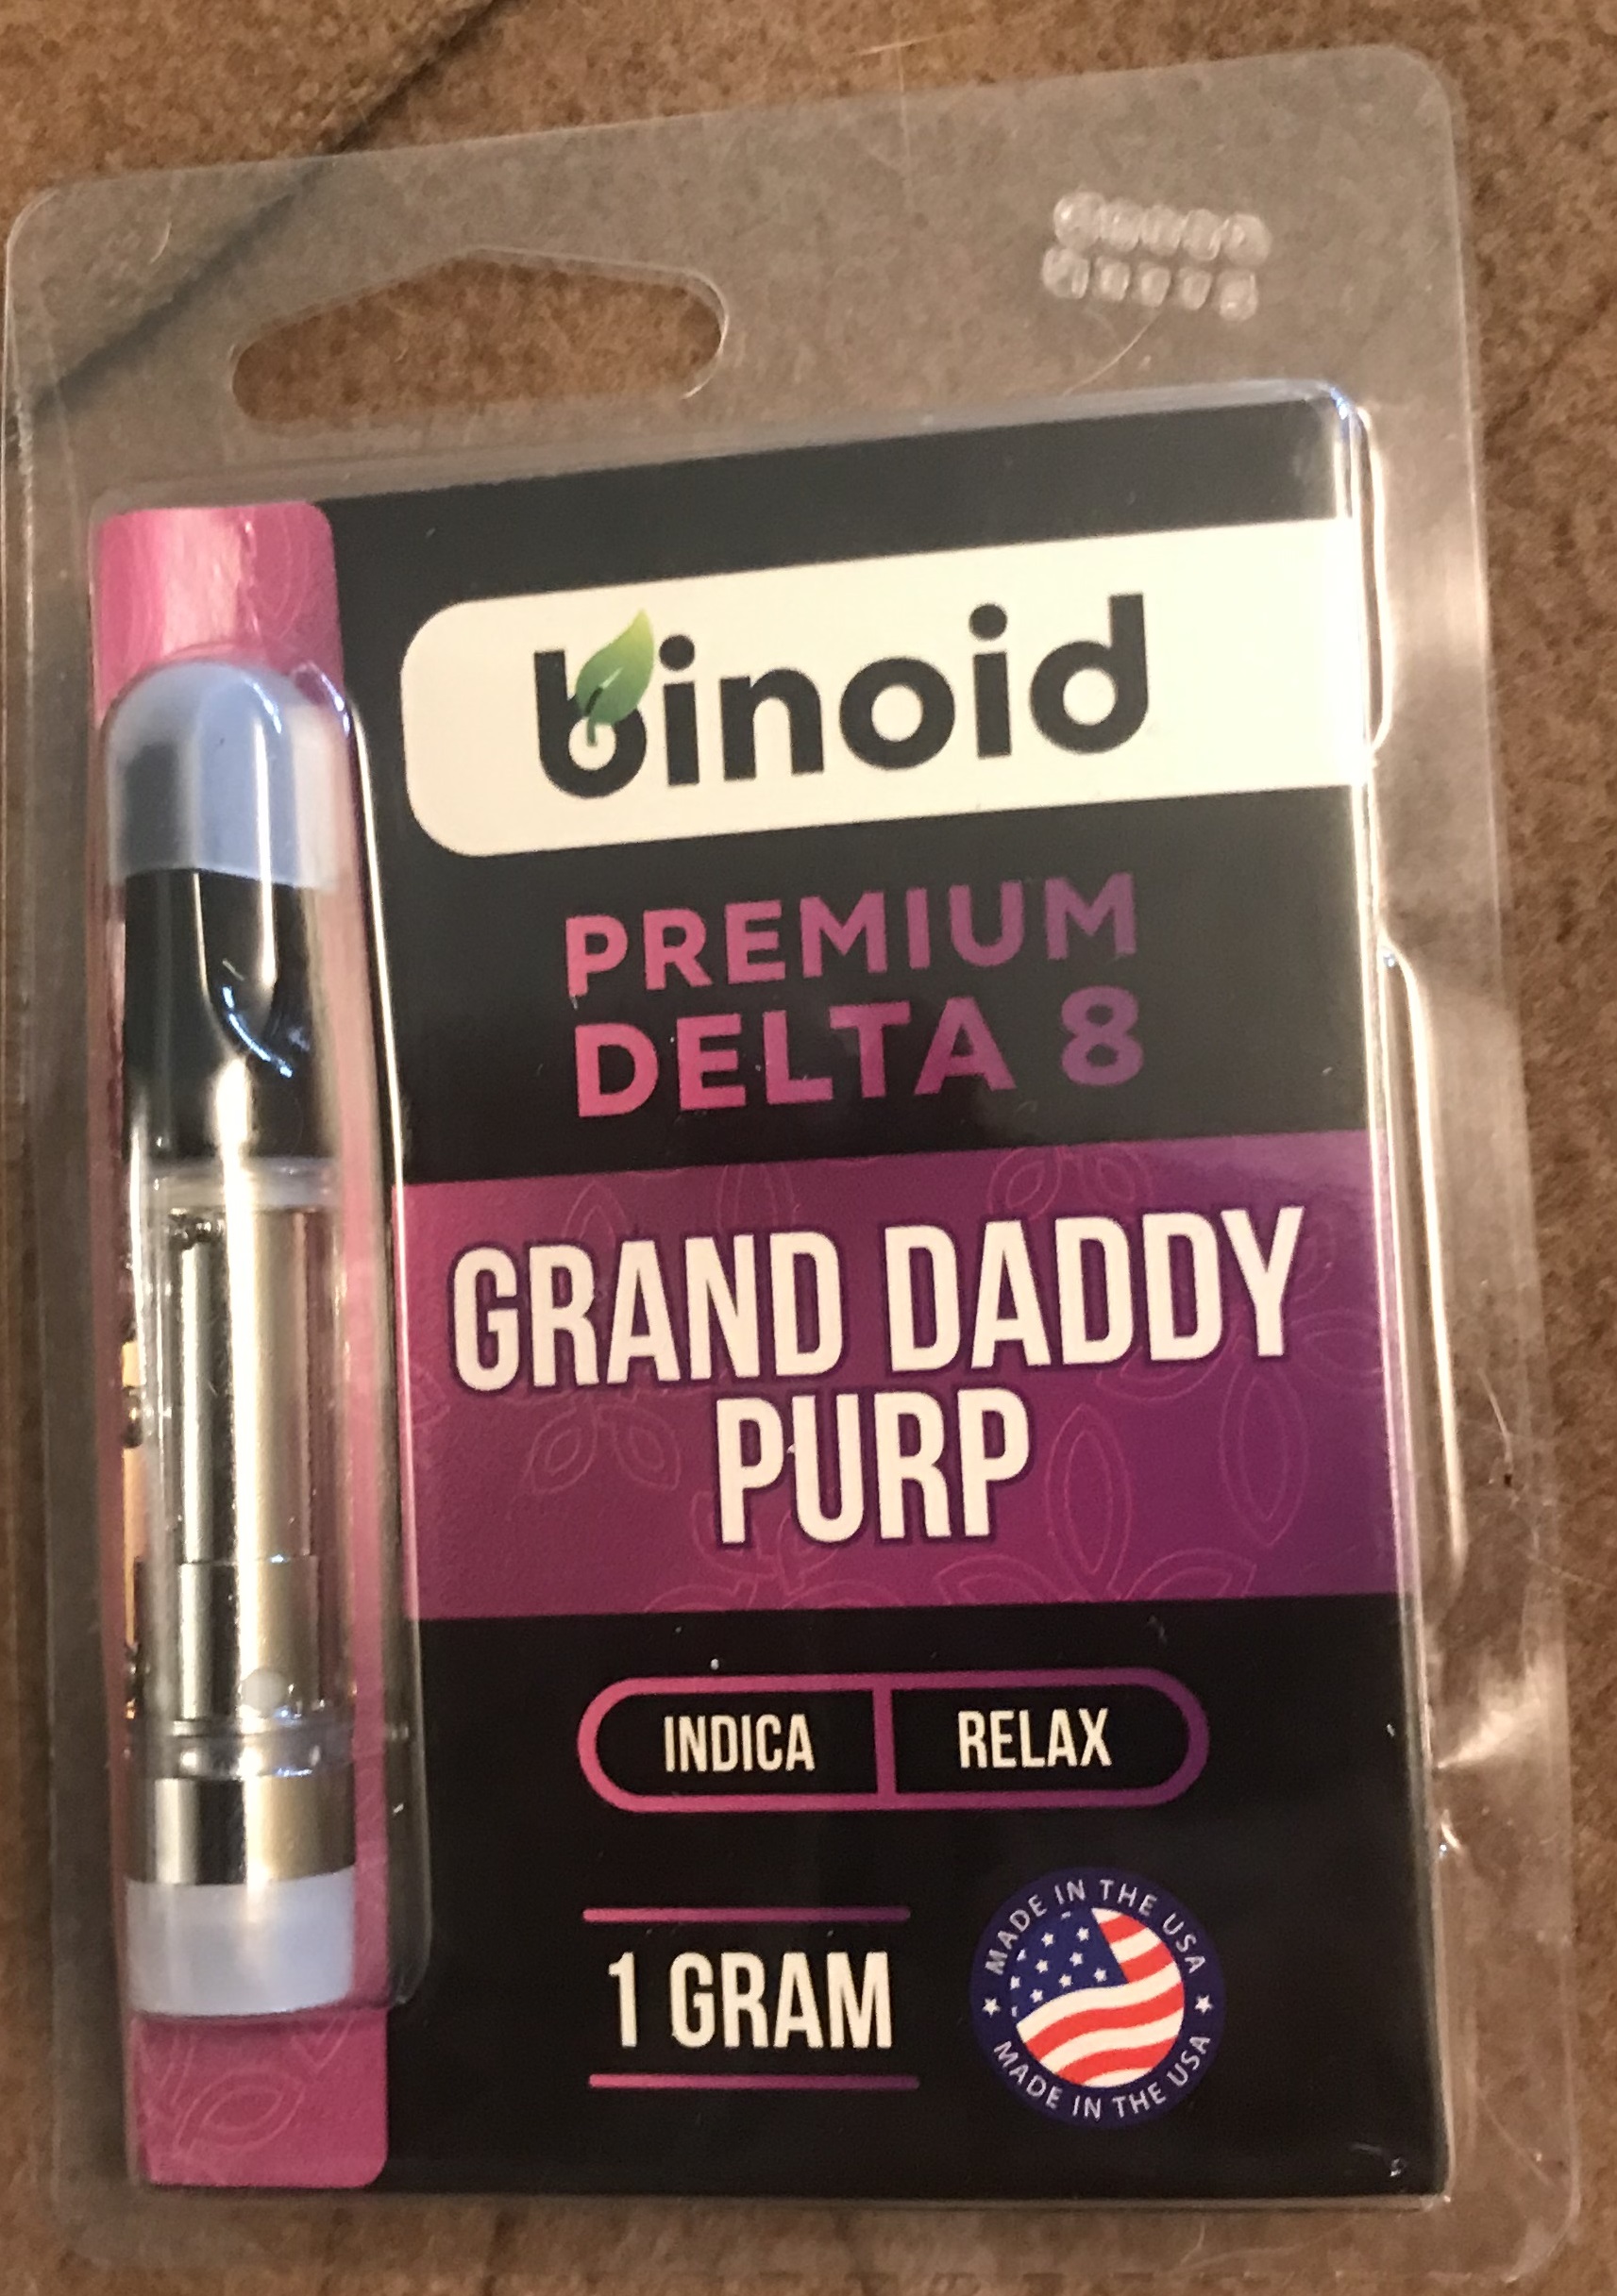 Delta 8 Cartridges Online - Products|Thc|Hemp|Brand|Gummies|Product|Delta-8|Cbd|Origin|Cannabis|Delta|Users|Effects|Cartridges|Brands|Range|List|Research|Usasource|Options|Benefits|Plant|Companies|Vape|Source|Results|Gummy|People|Space|High-Quality|Quality|Place|Overview|Flowers|Lab|Drug|Cannabinoids|Tinctures|Overviewproducts|Cartridge|Delta-8 Thc|Delta-8 Products|Delta-9 Thc|Delta-8 Brands|Usa Source|Delta-8 Thc Products|Cannabis Plant|Federal Level|United States|Delta-8 Gummies|Delta-8 Space|Health Canada|Delta Products|Delta-8 Thc Gummies|Delta-8 Companies|Vape Cartridges|Similar Benefits|Hemp Doctor|Brand Overviewproducts|Drug Test|High-Quality Products|Organic Hemp|San Jose|Editorial Team|Farm Bill|Overview Products|Wide Range|Psychoactive Properties|Reliable Provider|Boston Hempire